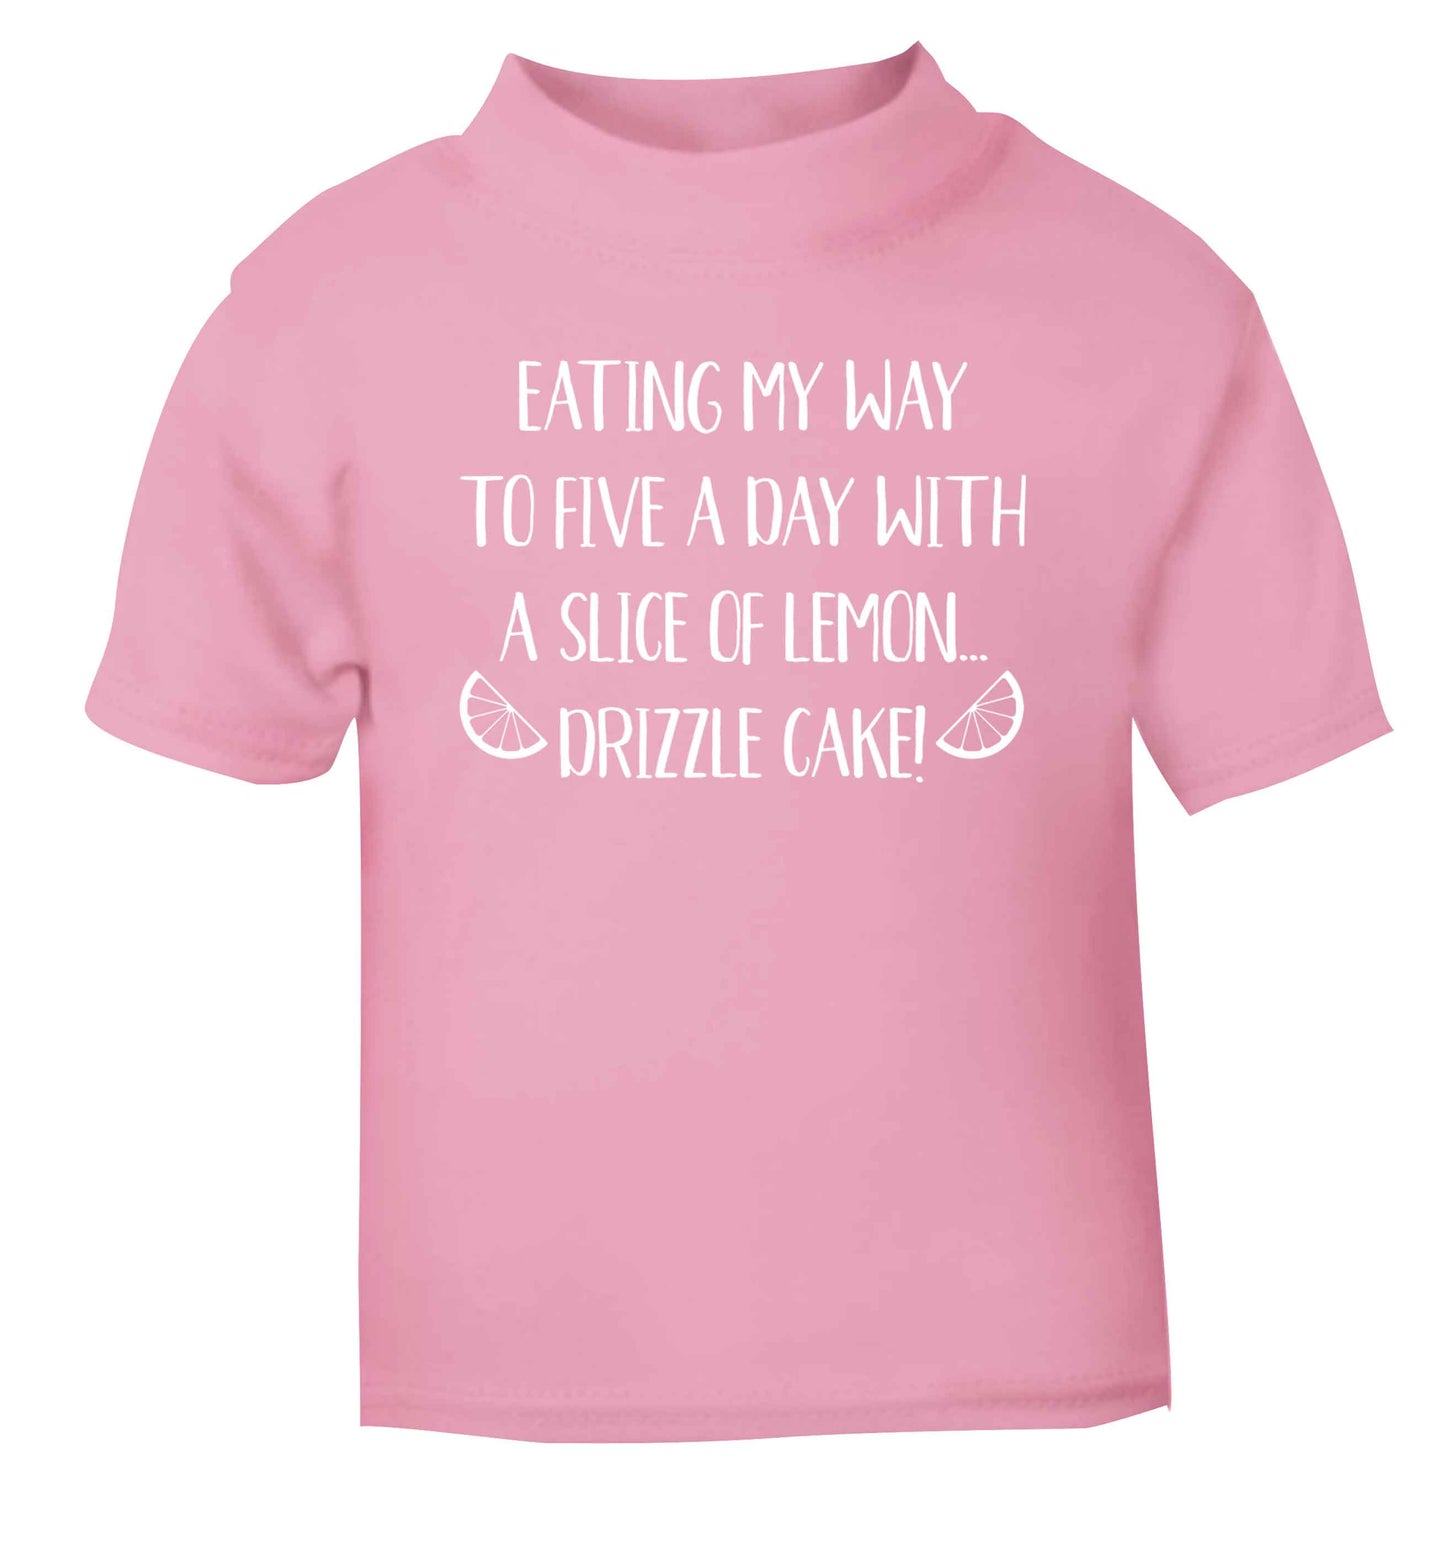 Eating my way to five a day with a slice of lemon drizzle cake day light pink Baby Toddler Tshirt 2 Years